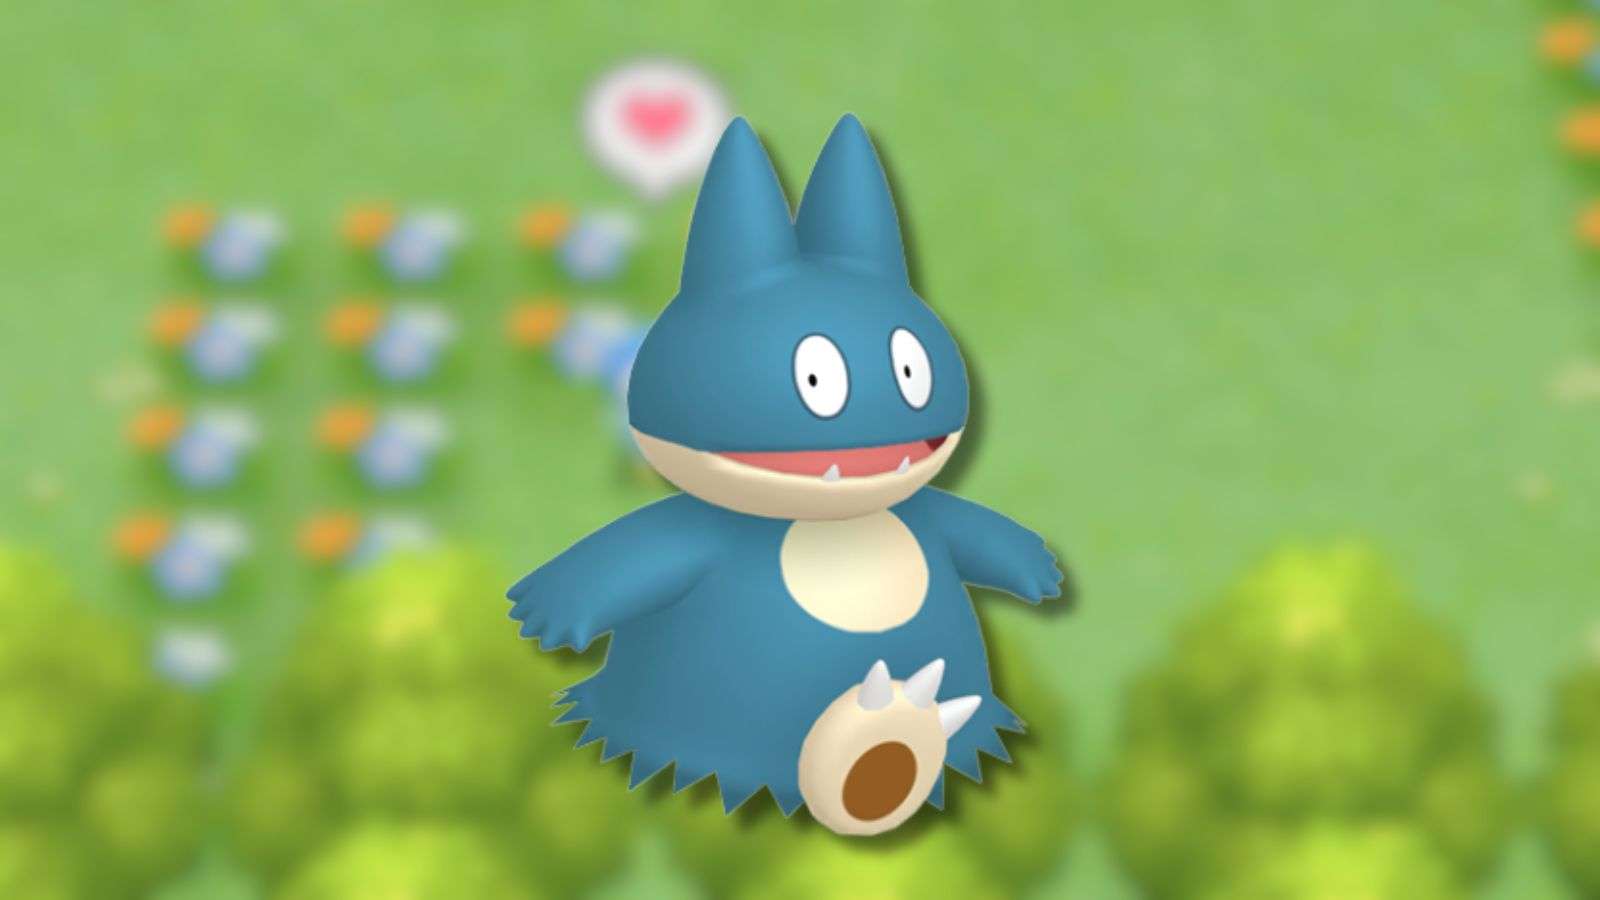 Munchlax with Pokemon BDSP background.